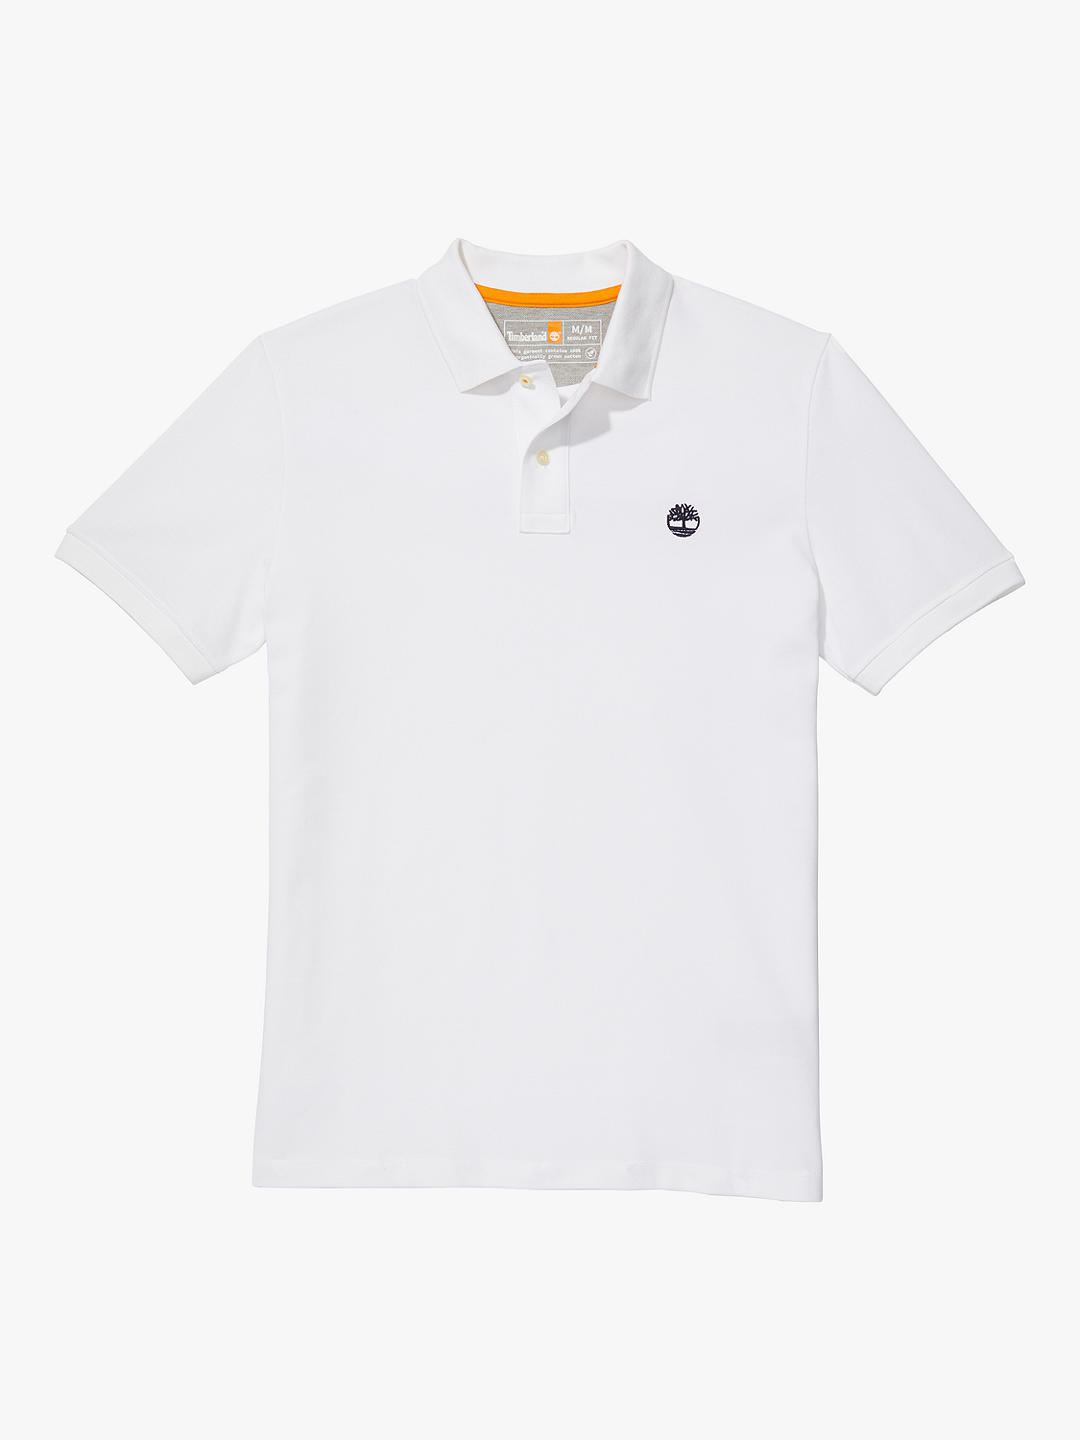 Timberland Millers Organic Cotton Pique Polo Shirt